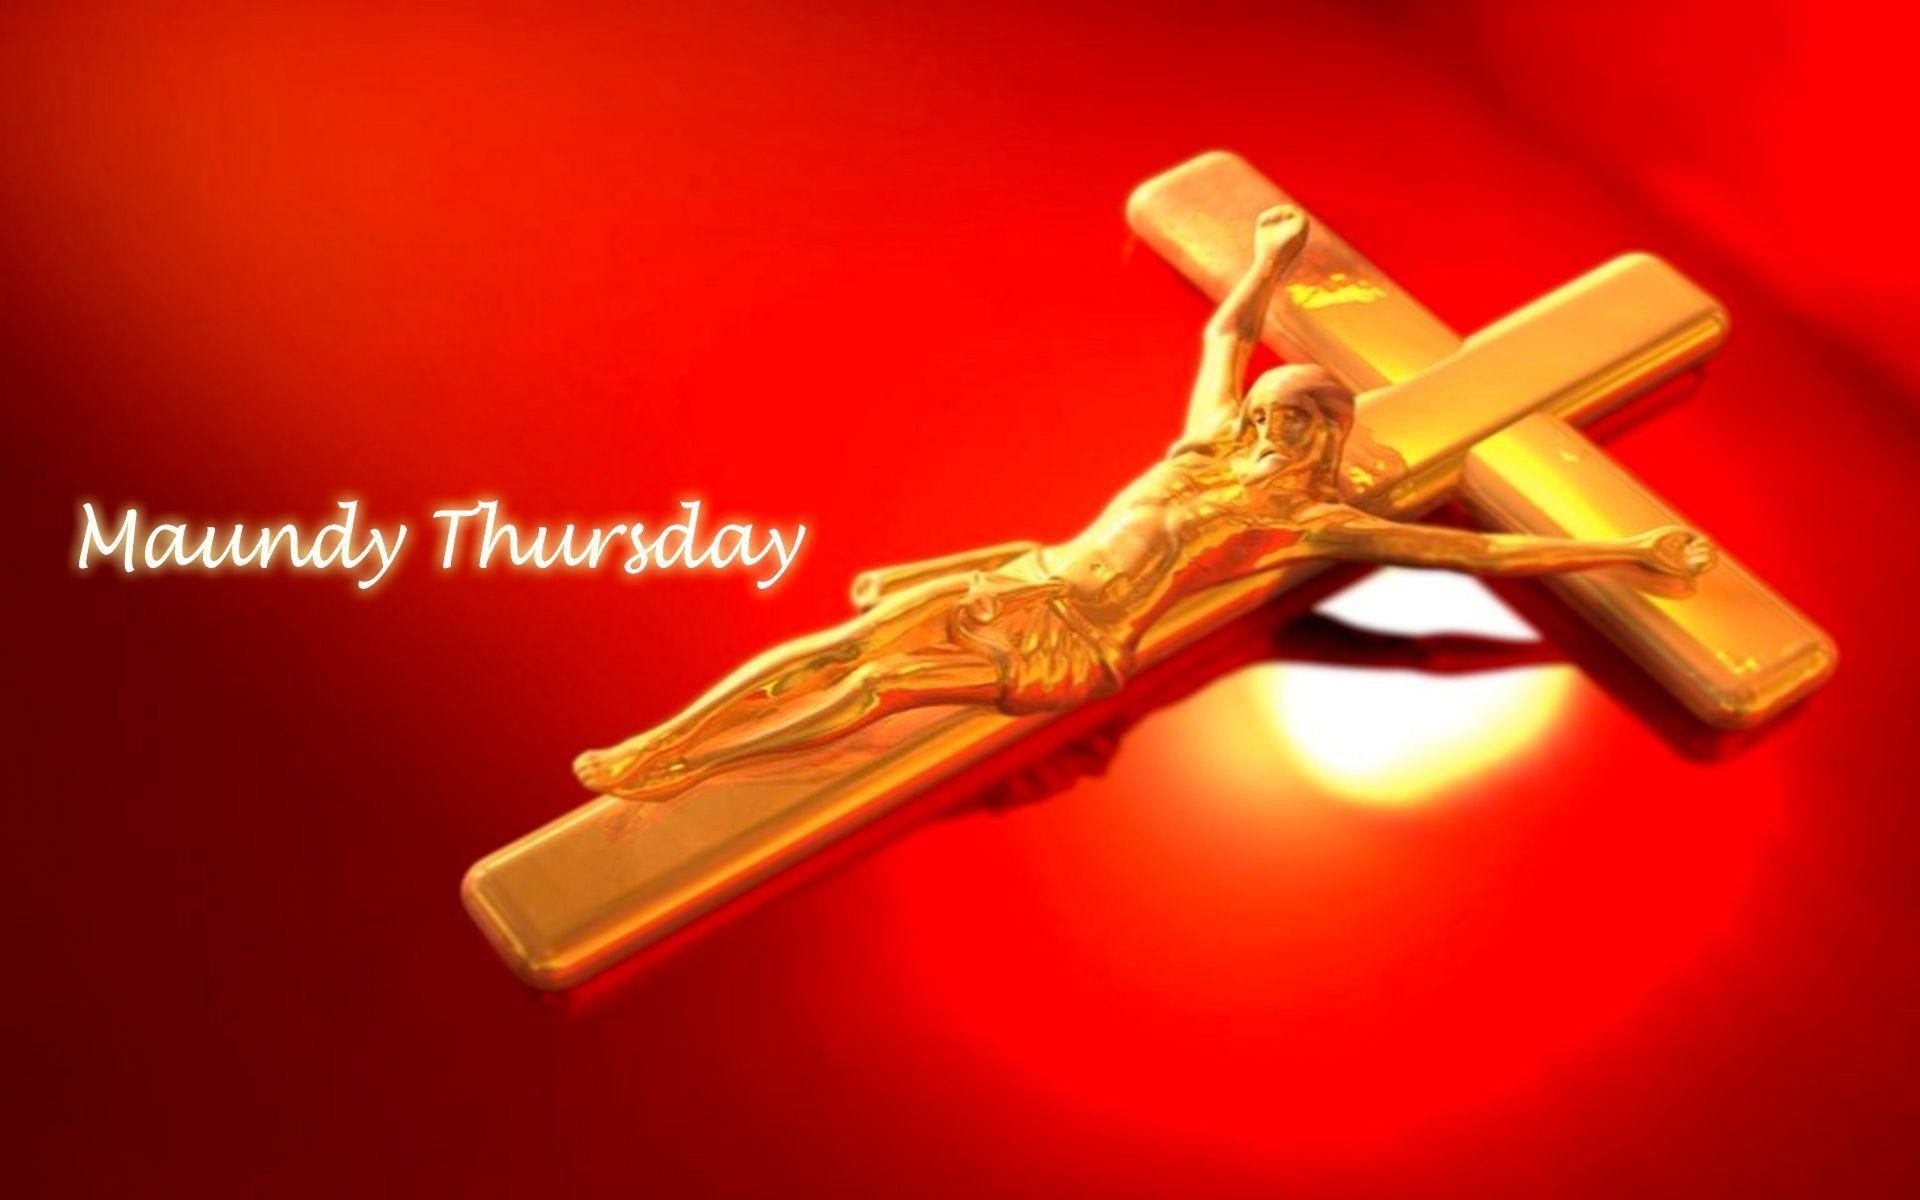 1920x1200 Maundy Thursday Backgrounds and Wallpapers | Download Printable .